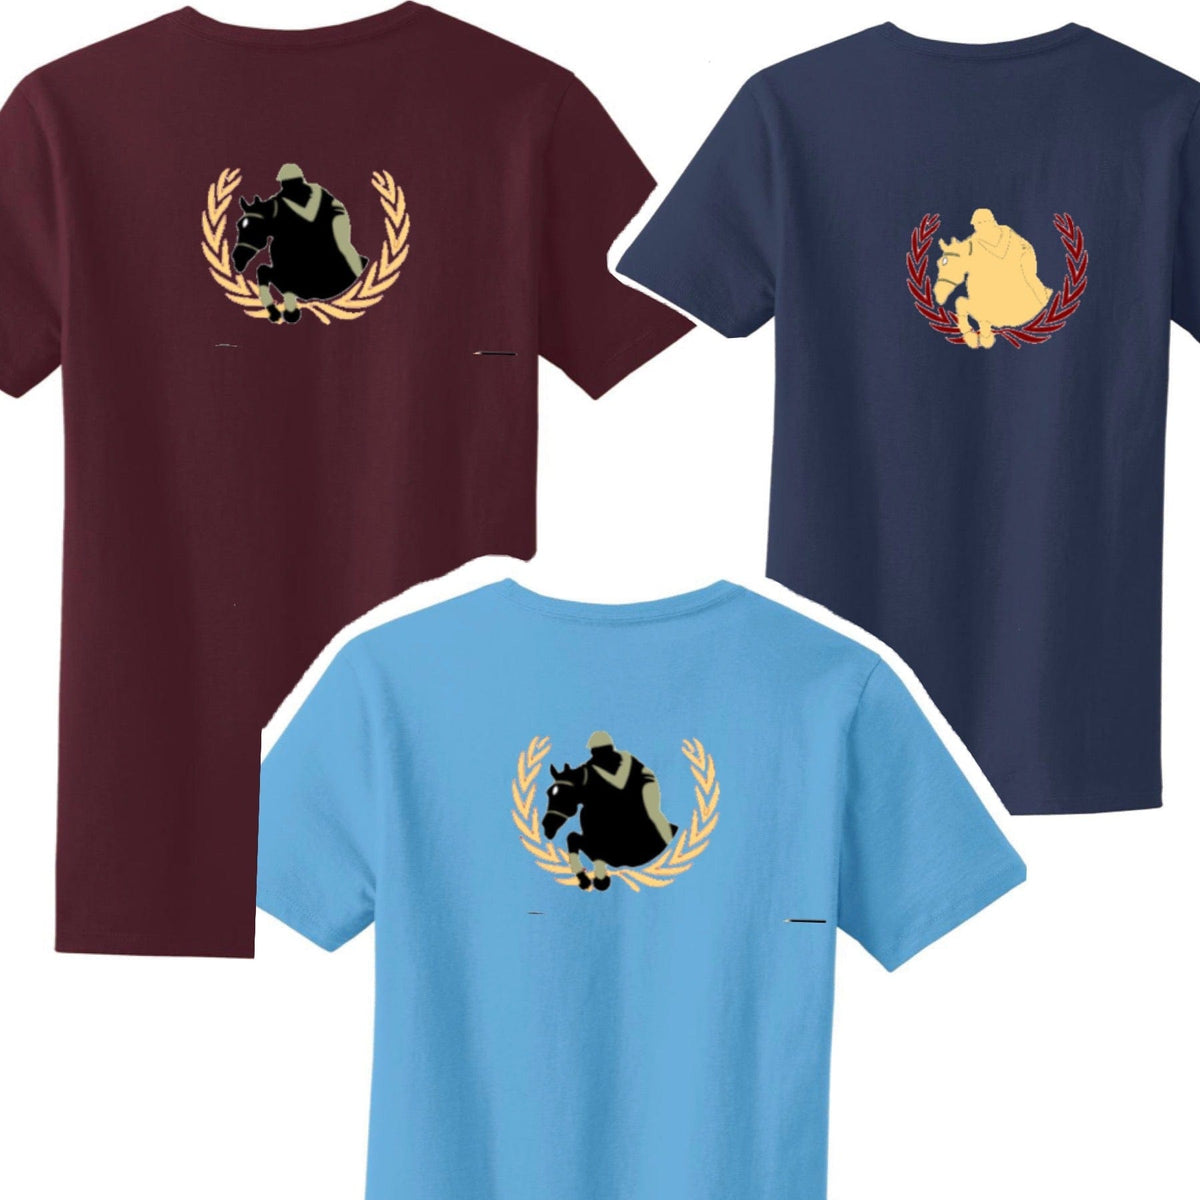 Equestrian Team Apparel Laurel Crown Farms Tee Shirt equestrian team apparel online tack store mobile tack store custom farm apparel custom show stable clothing equestrian lifestyle horse show clothing riding clothes horses equestrian tack store